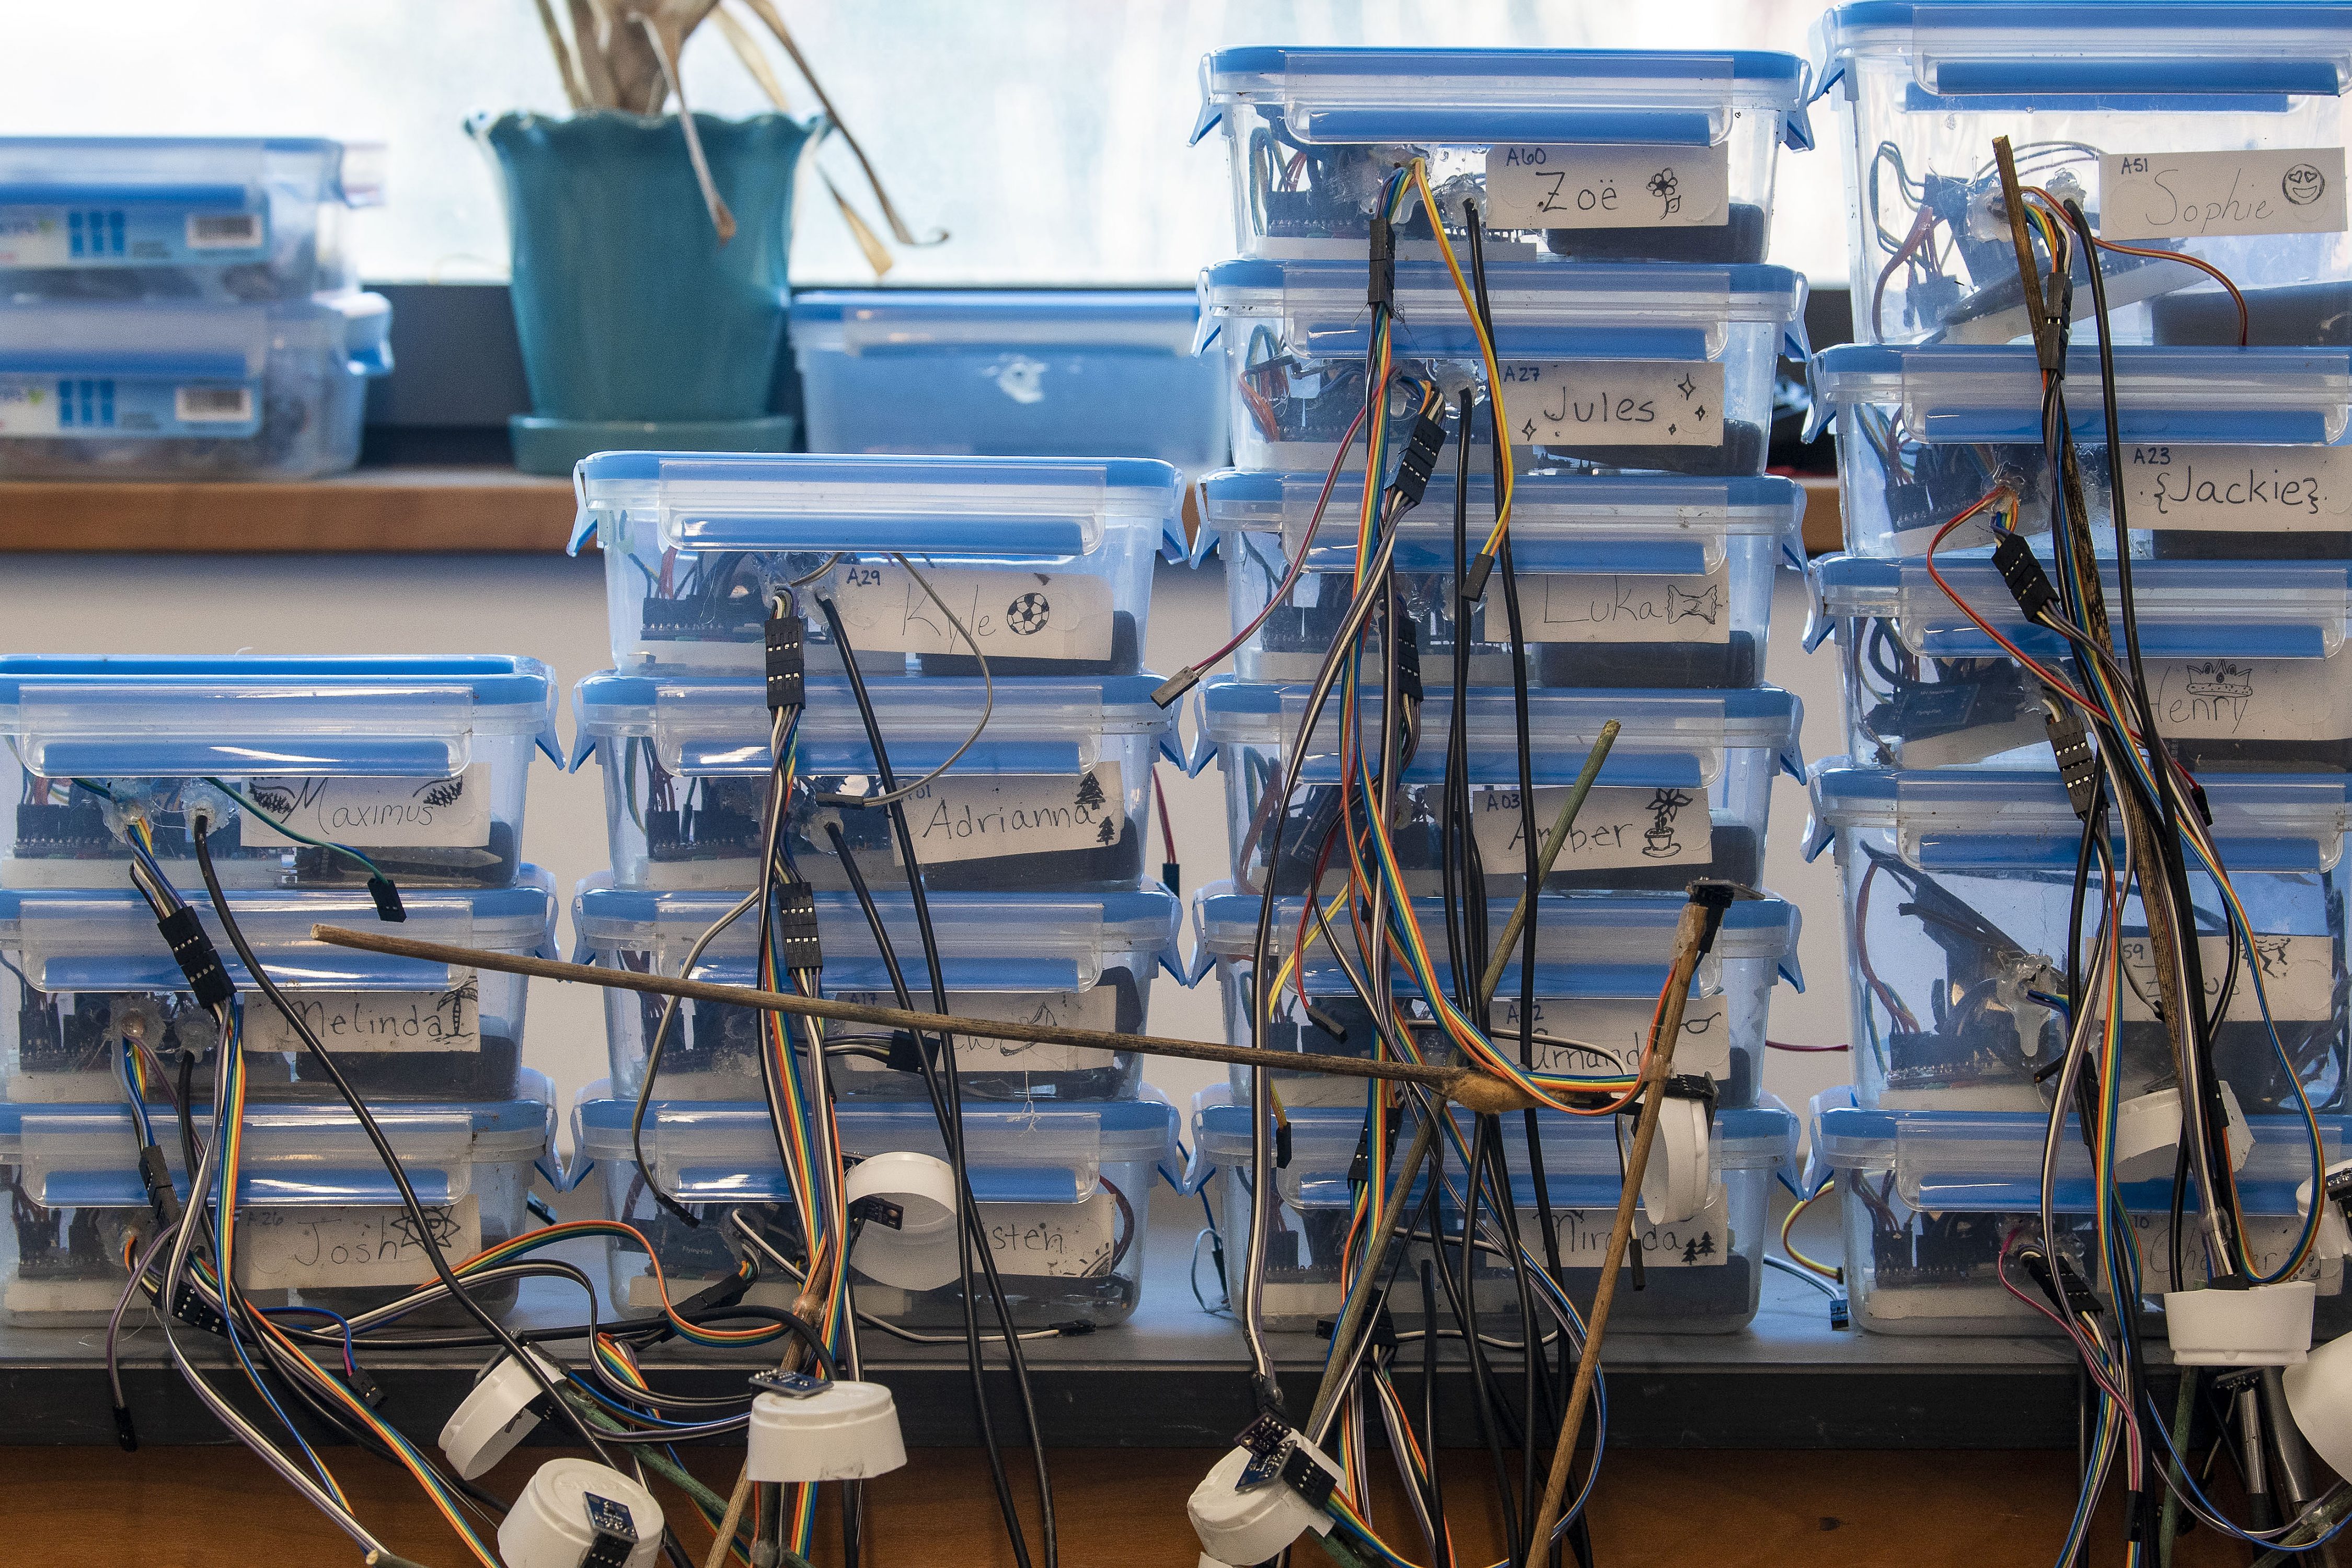 Stacks of Environmental Microcontroller Units (EMUs) that were developed by UConn researchers to facilitate the collection of fine-scale data. (Sean Flynn/UConn Photo)